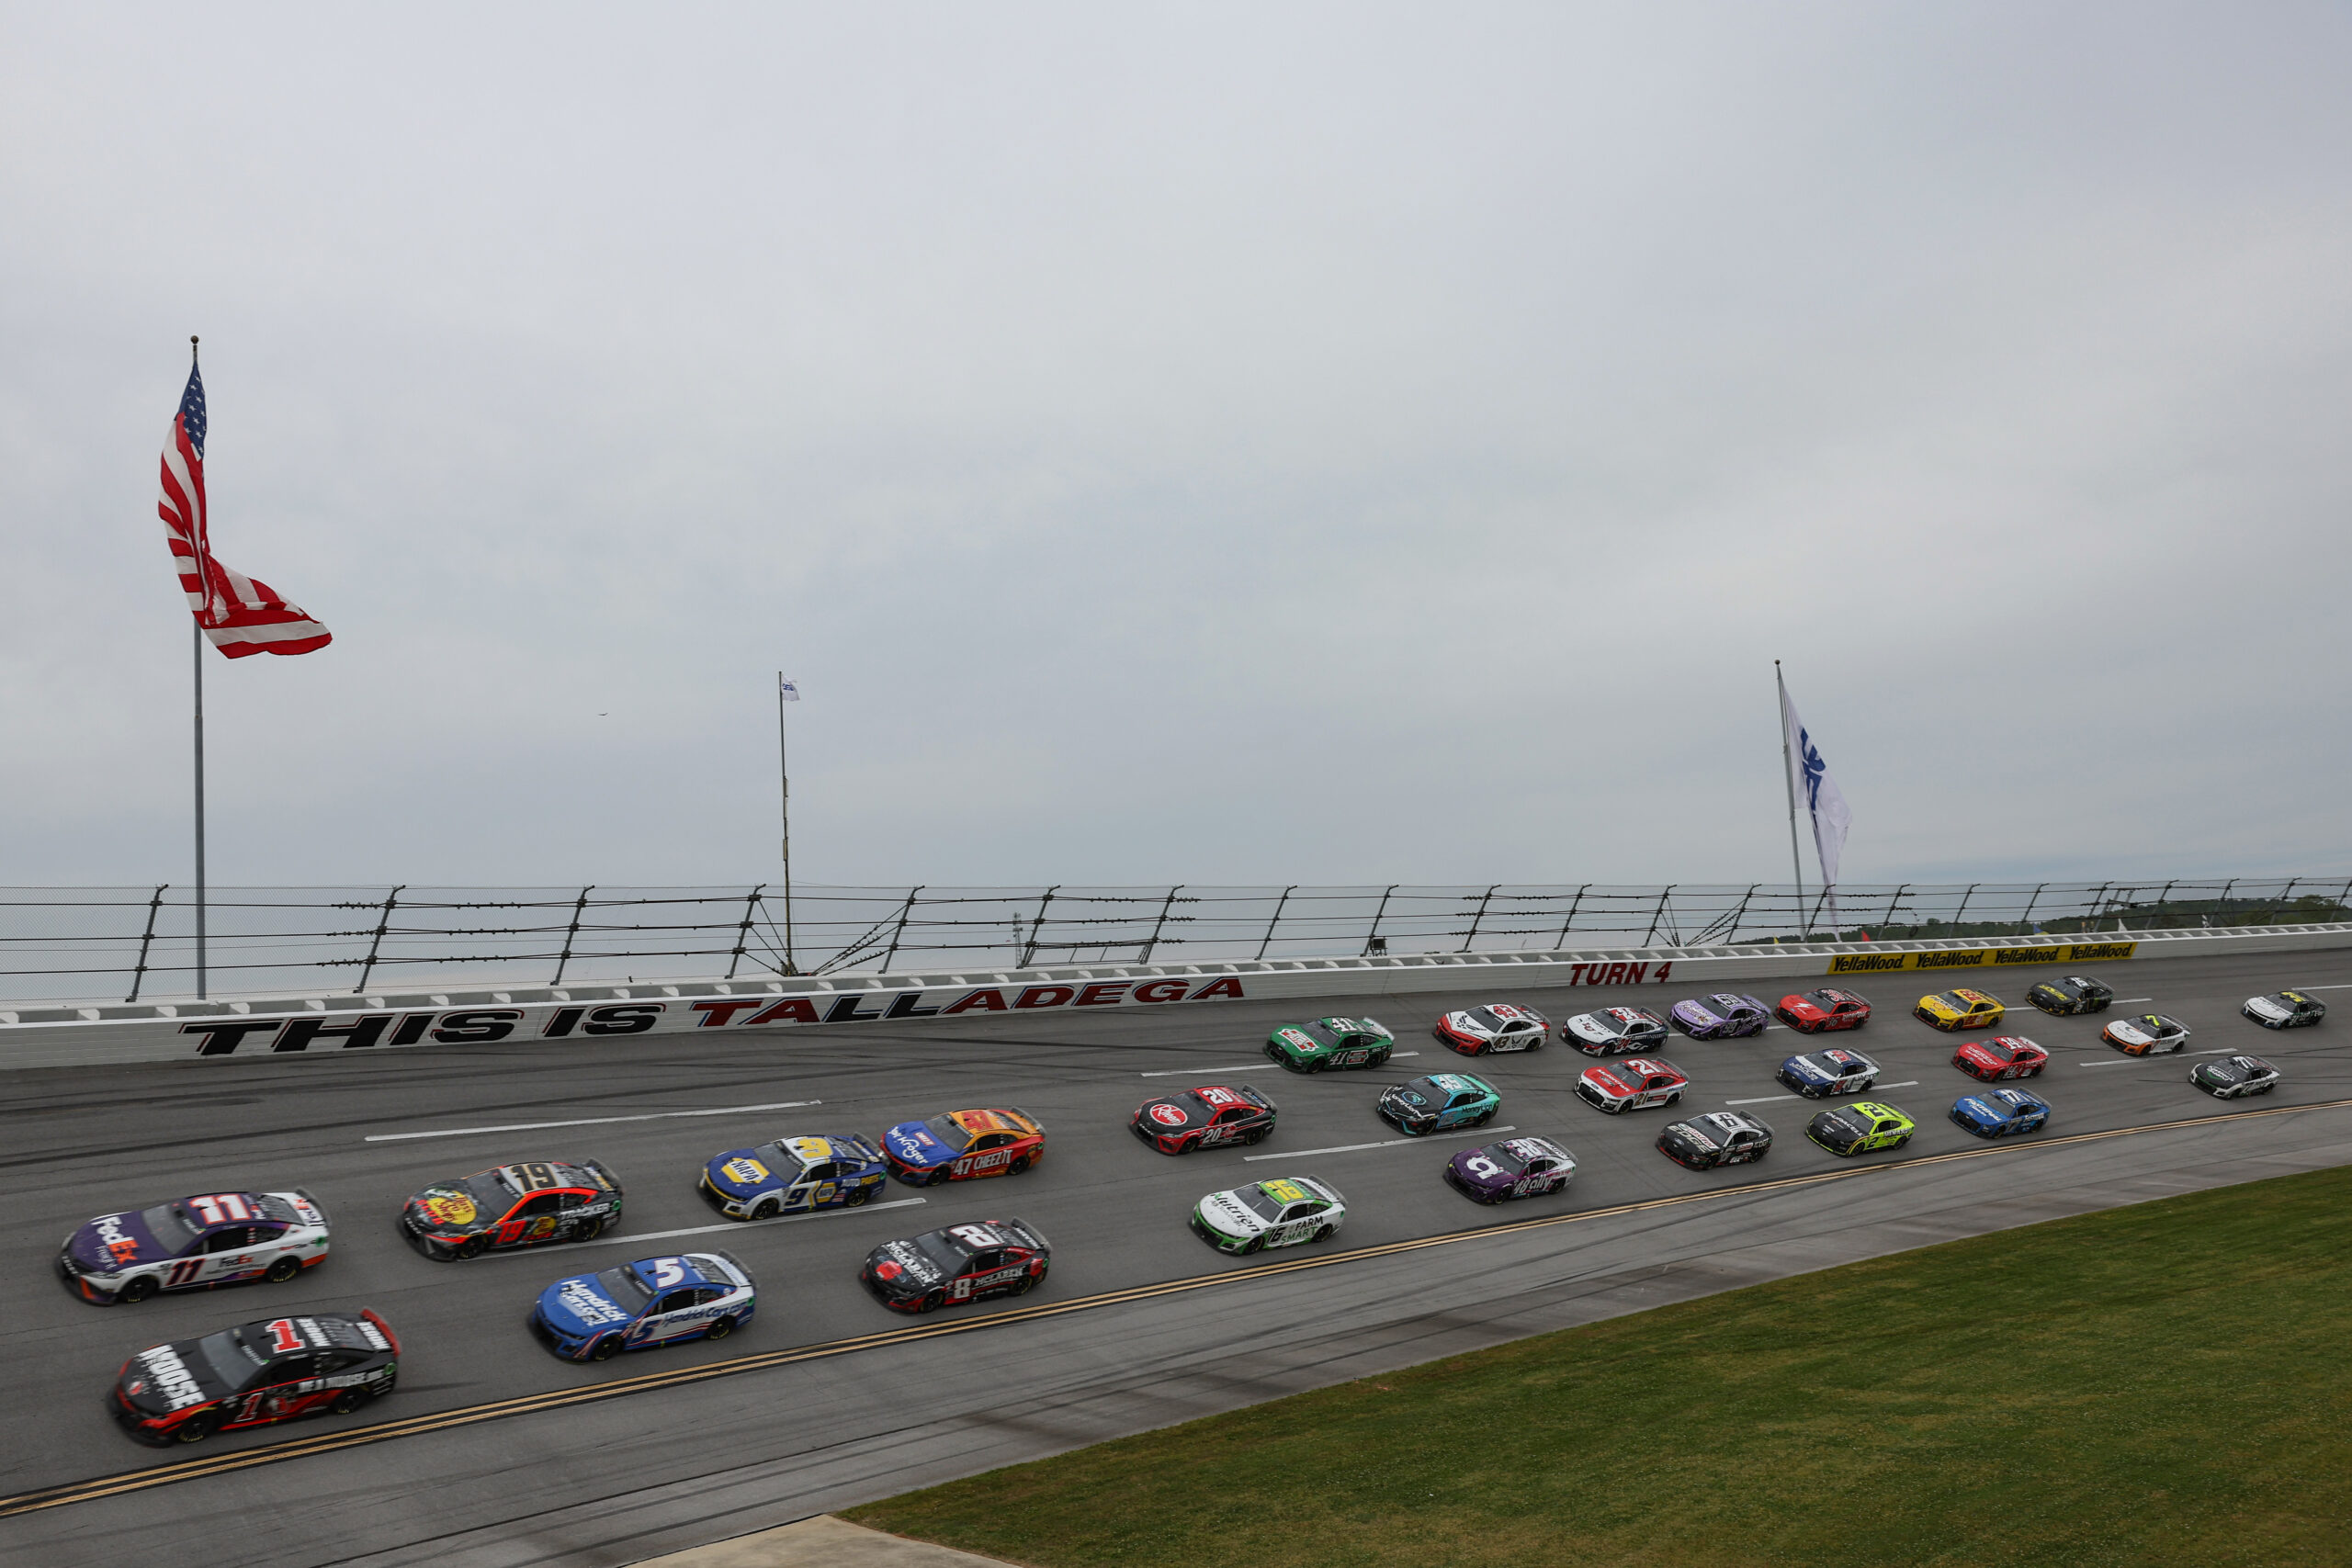 Who Will Master the Art of the Draft at Talladega?